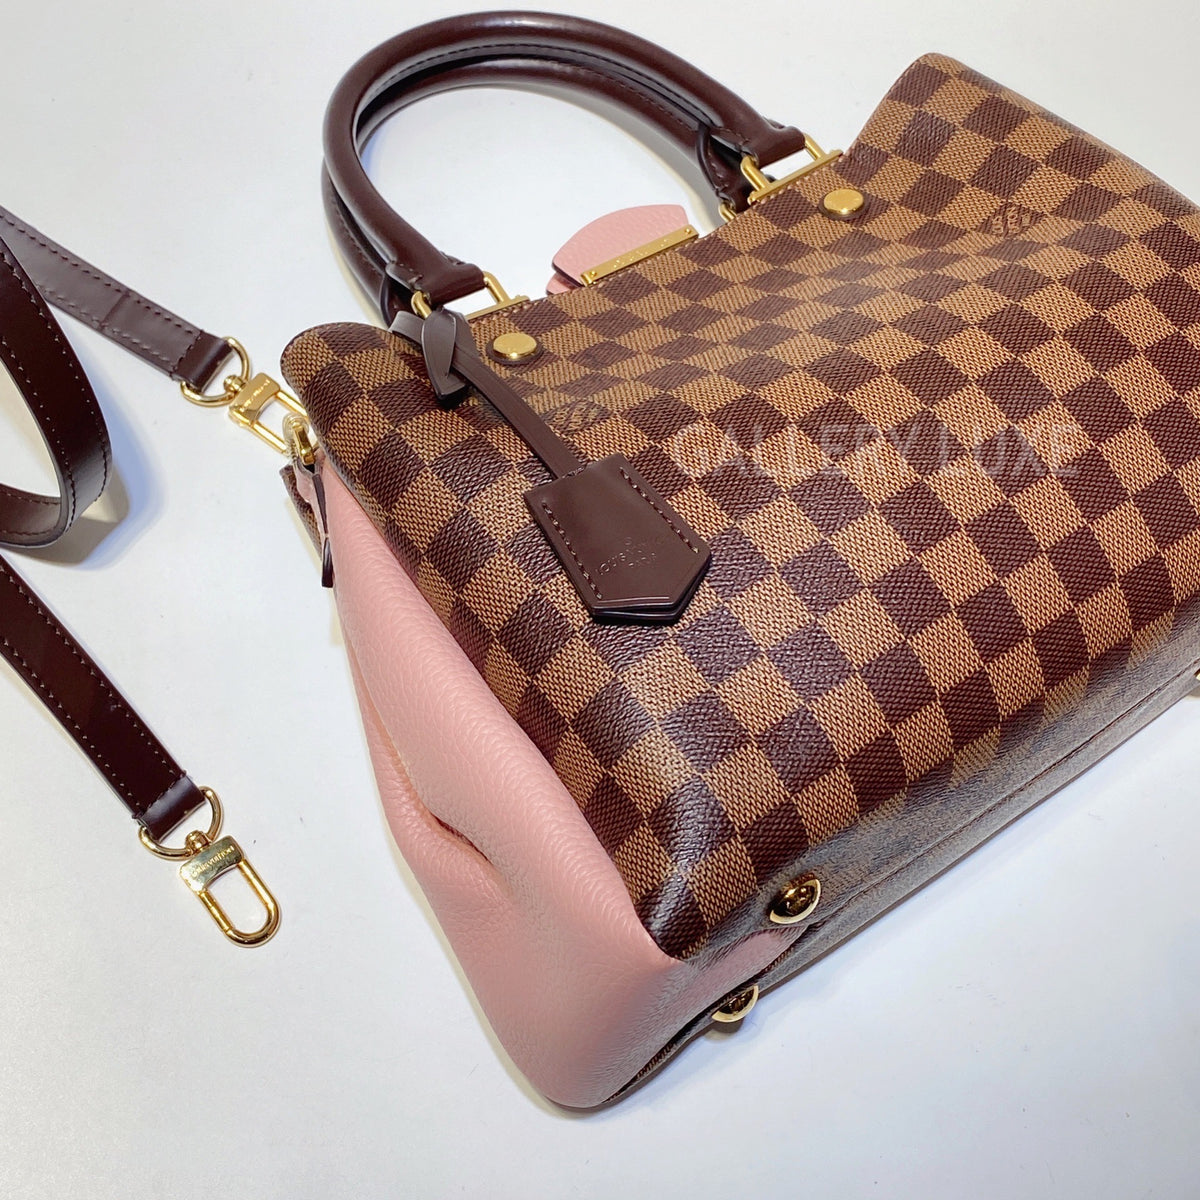 Louis Vuitton Brittany Bag Reviewed